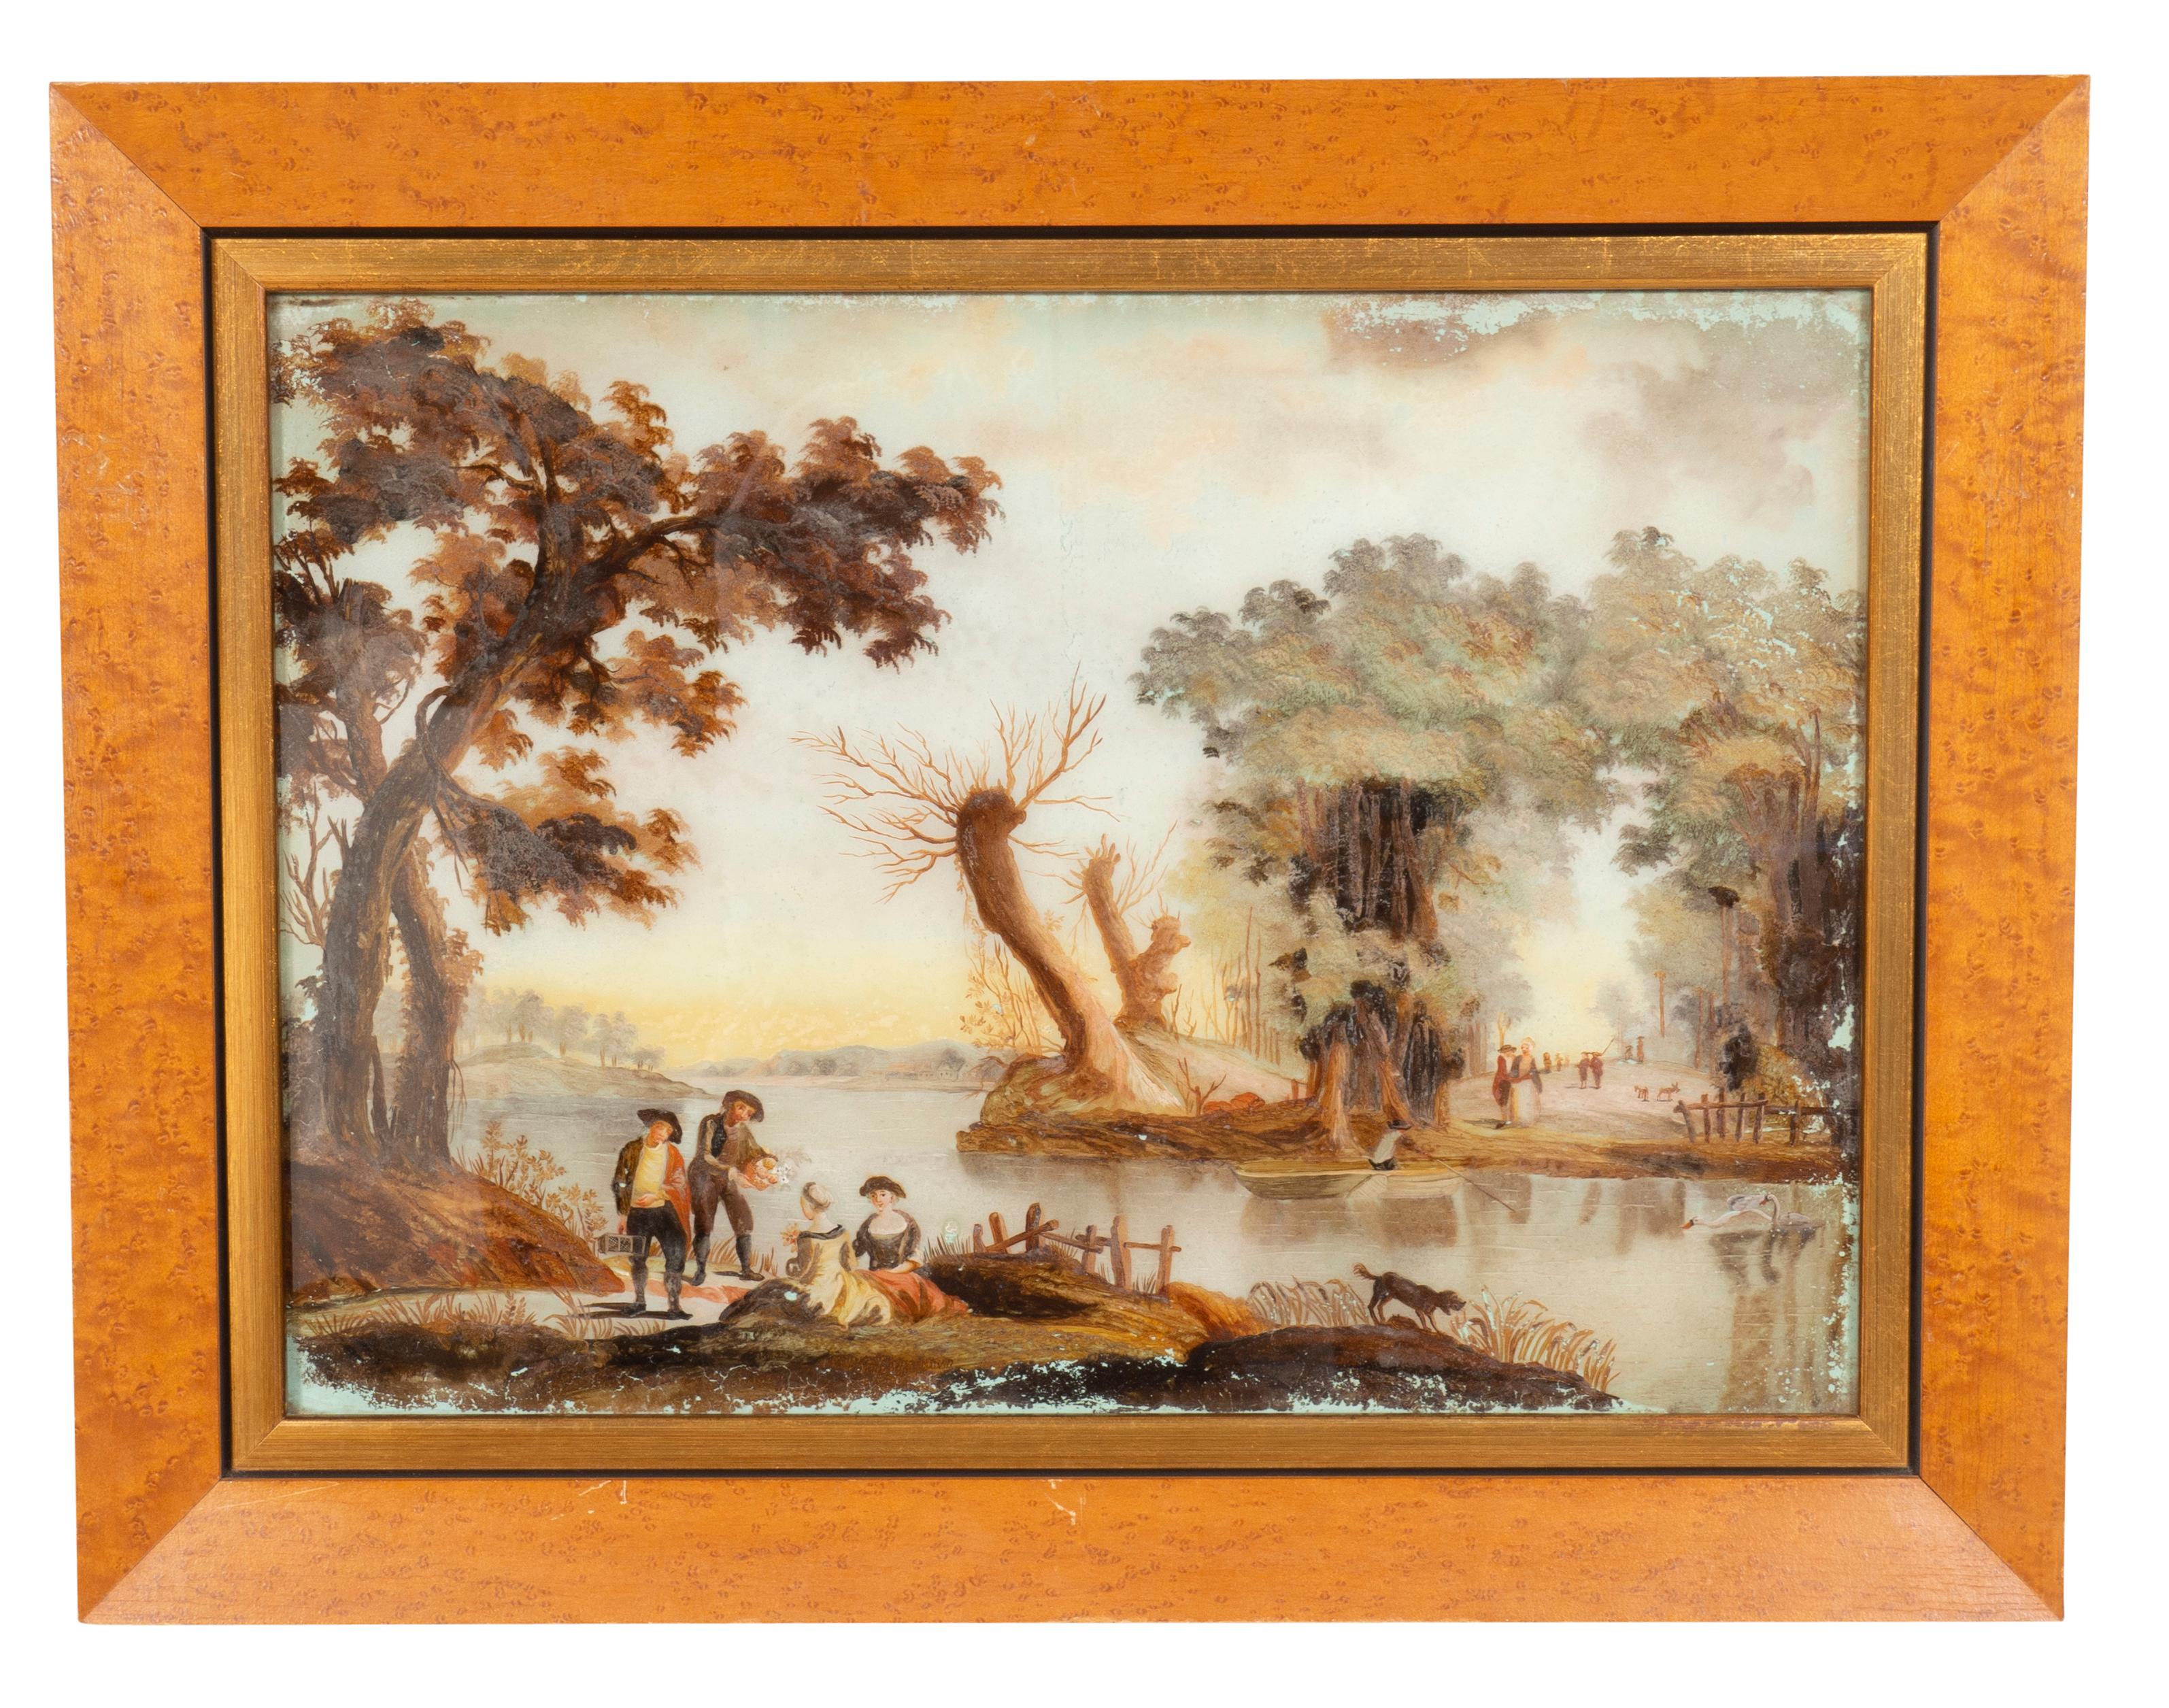 Each in later bird’s-eye maple frames. Depicting farm animals and skaters on a pond, houses and people in daily pursuits along a waterway.